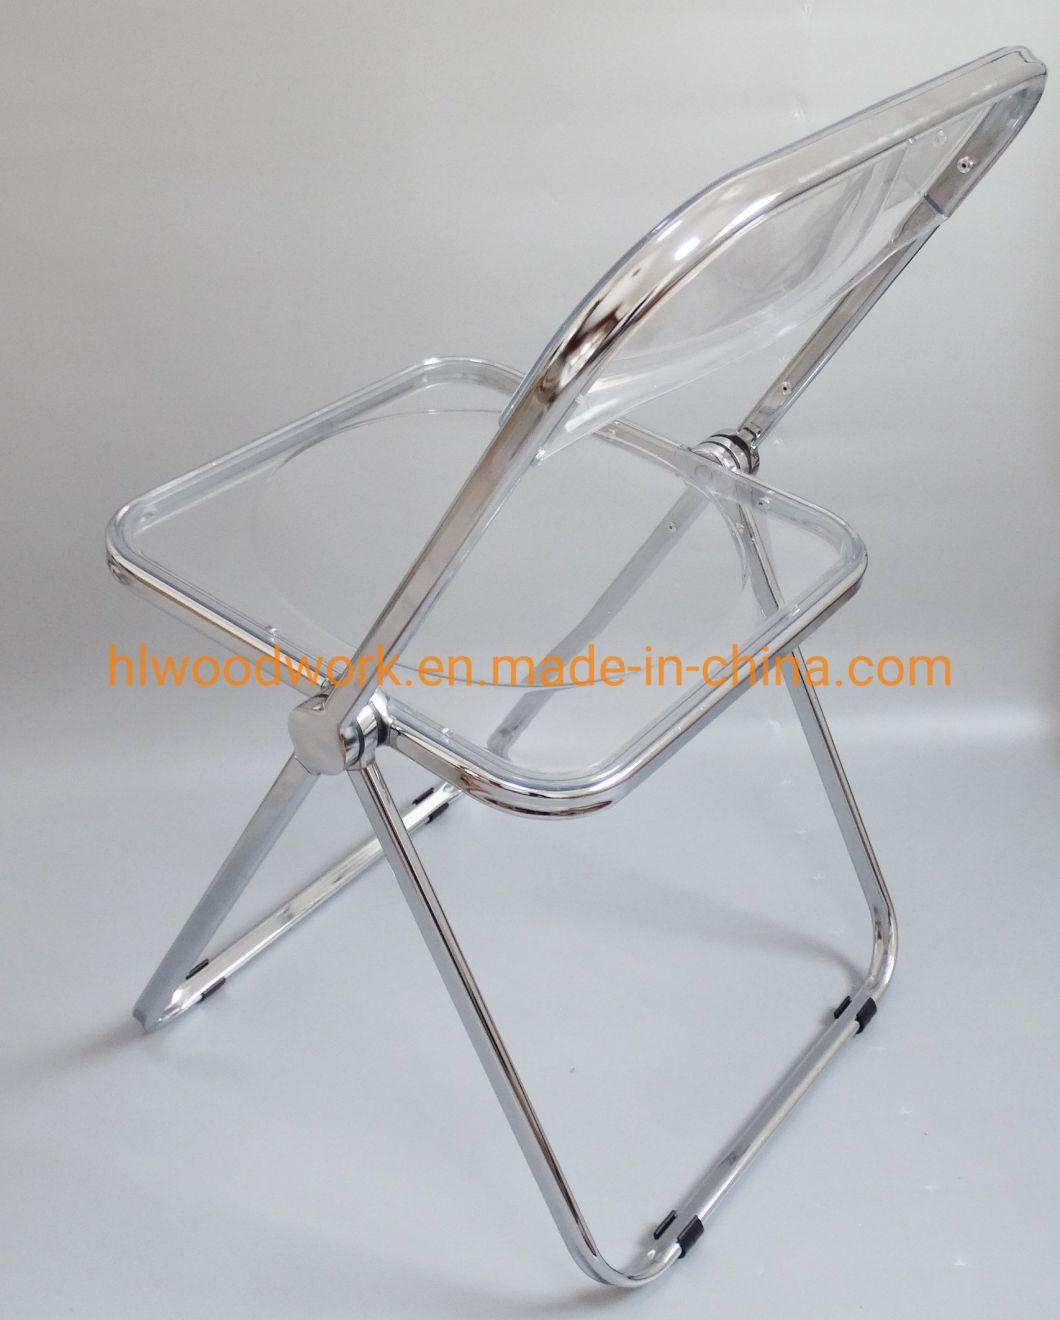 Modern Transparent Pink Folding Chair PC Plastic Resteraunt Chair Chrome Frame Office Bar Dining Leisure Banquet Wedding Meeting Chair Plastic Dining Chair